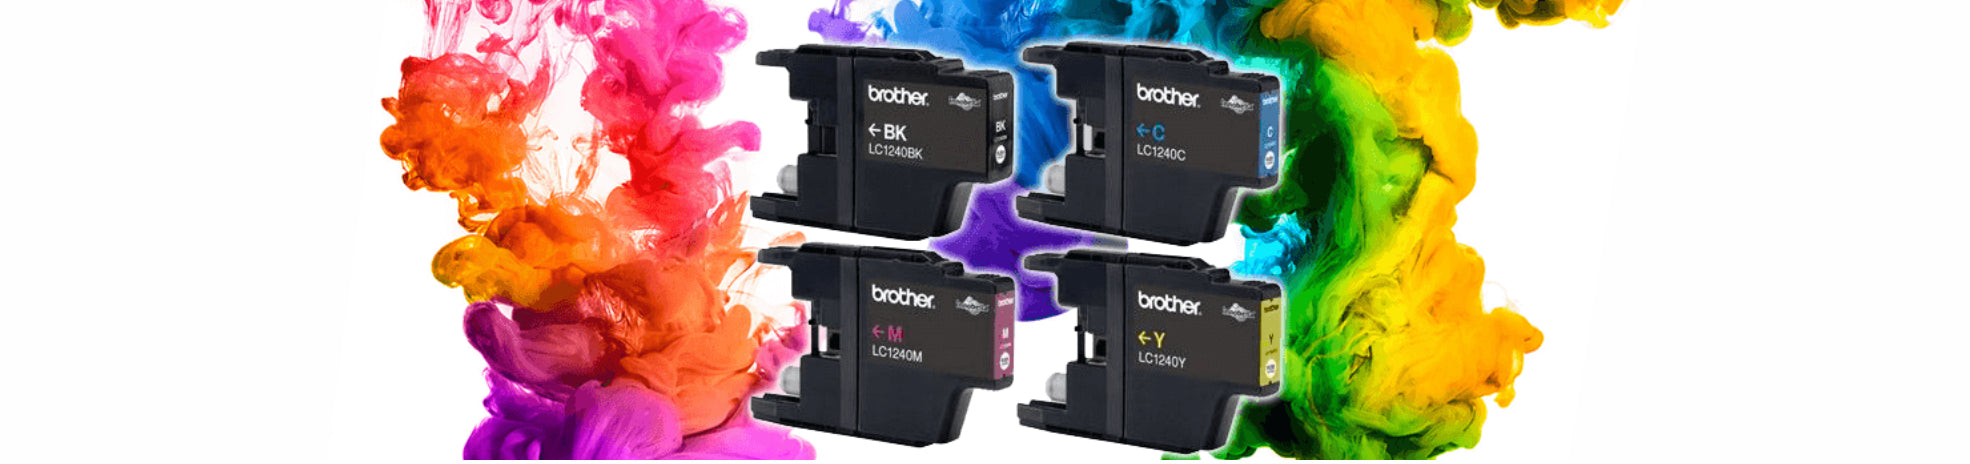 Brother Toners Cartridges